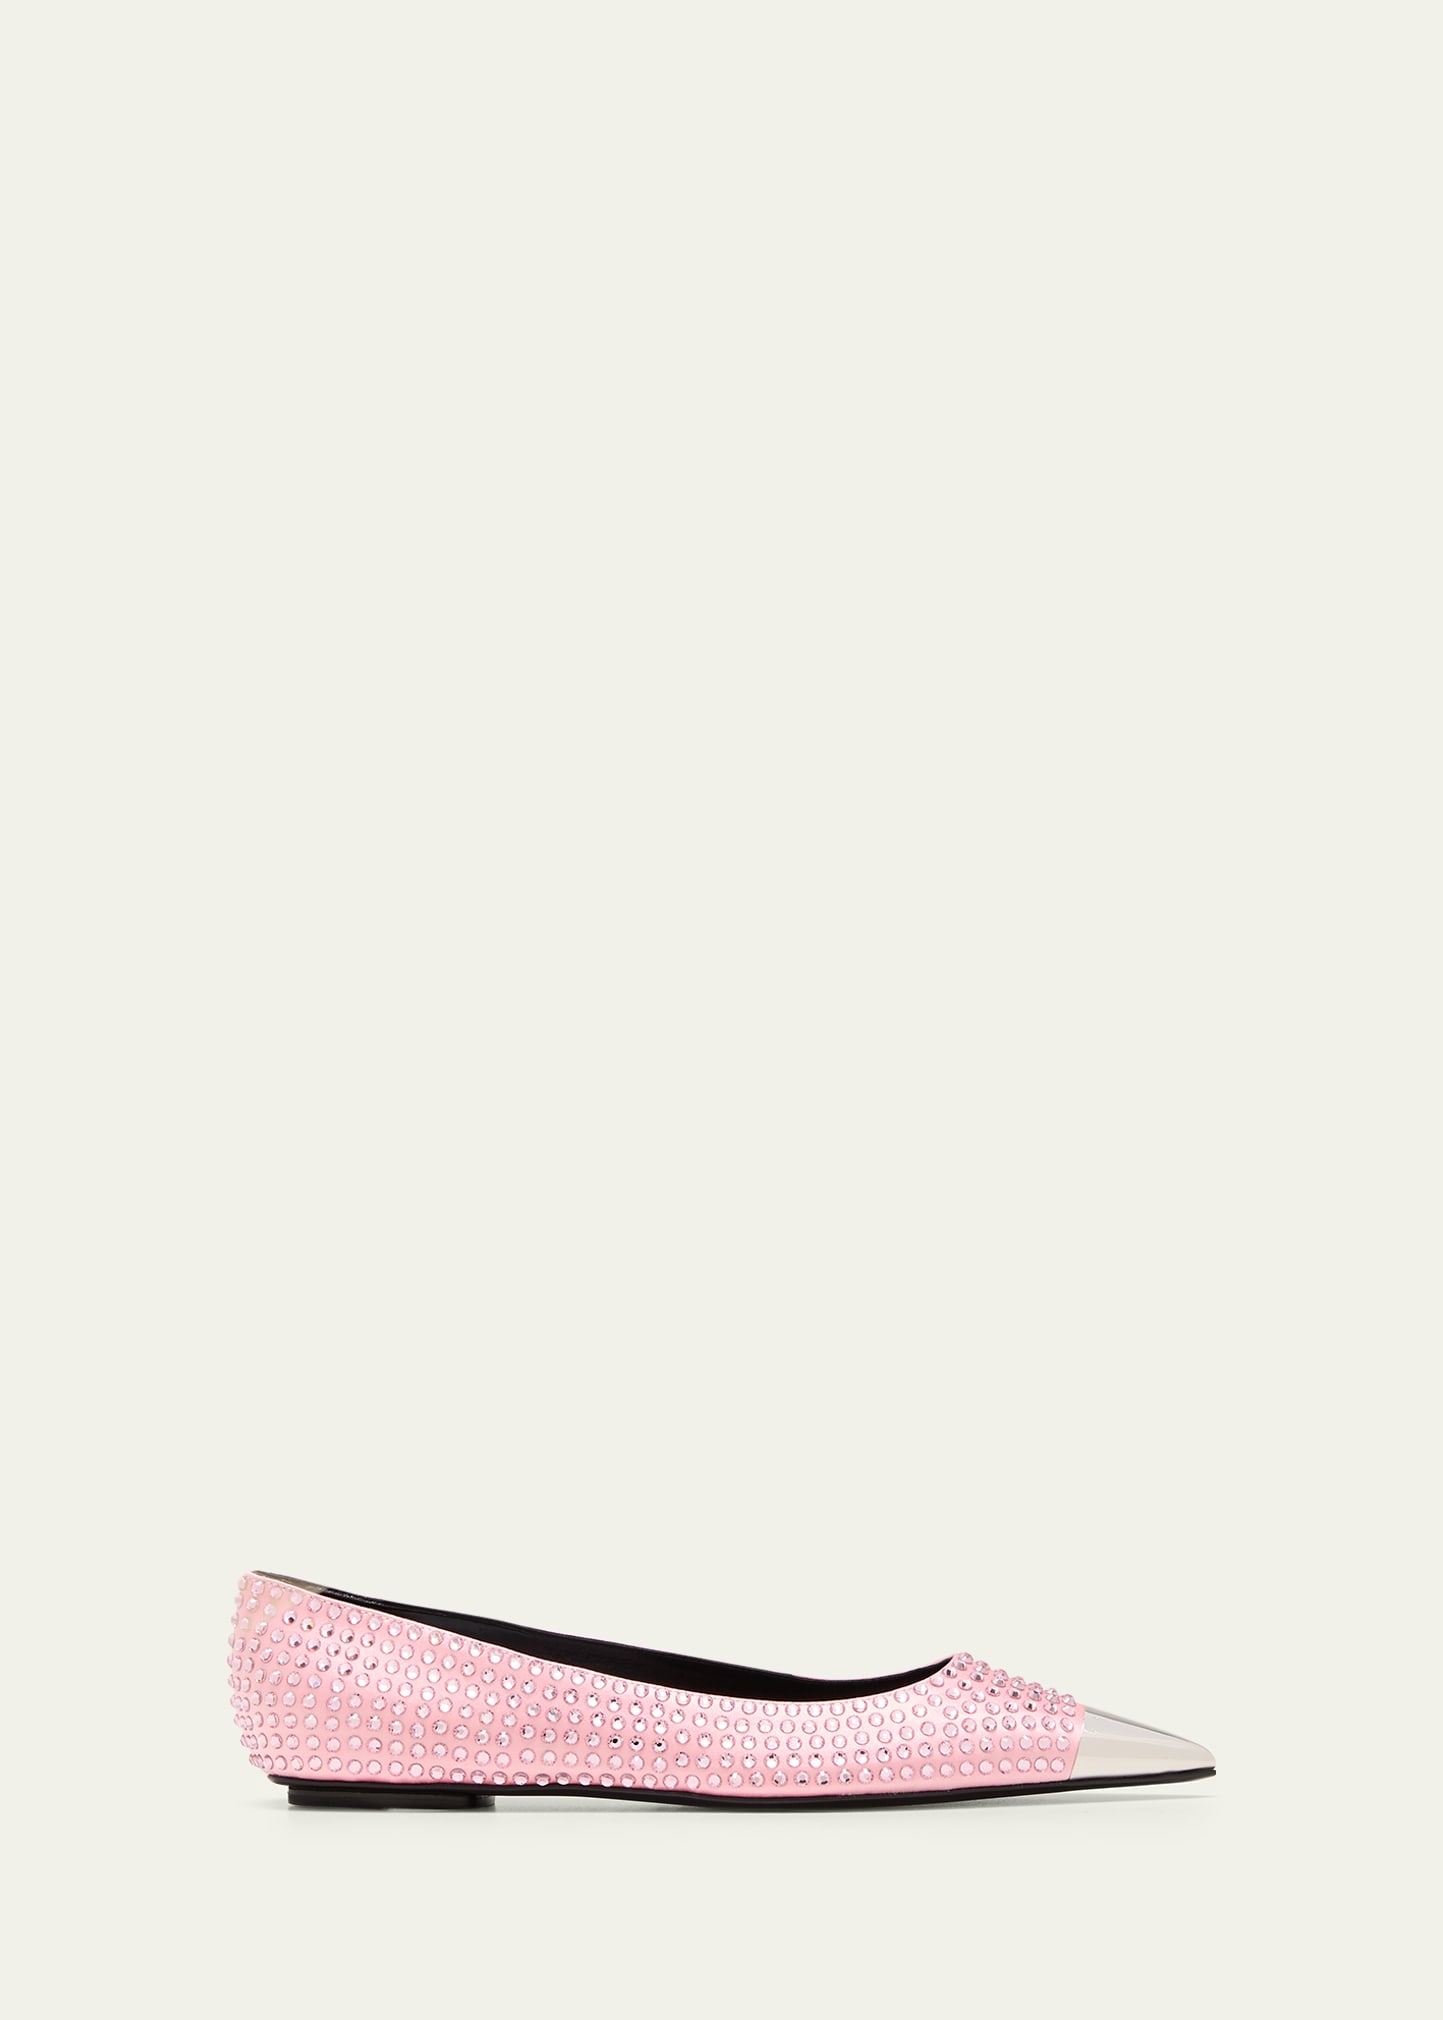 Area X Sergio Rossi Satin Strass Ballet Flat Wit In Light Rose 5903